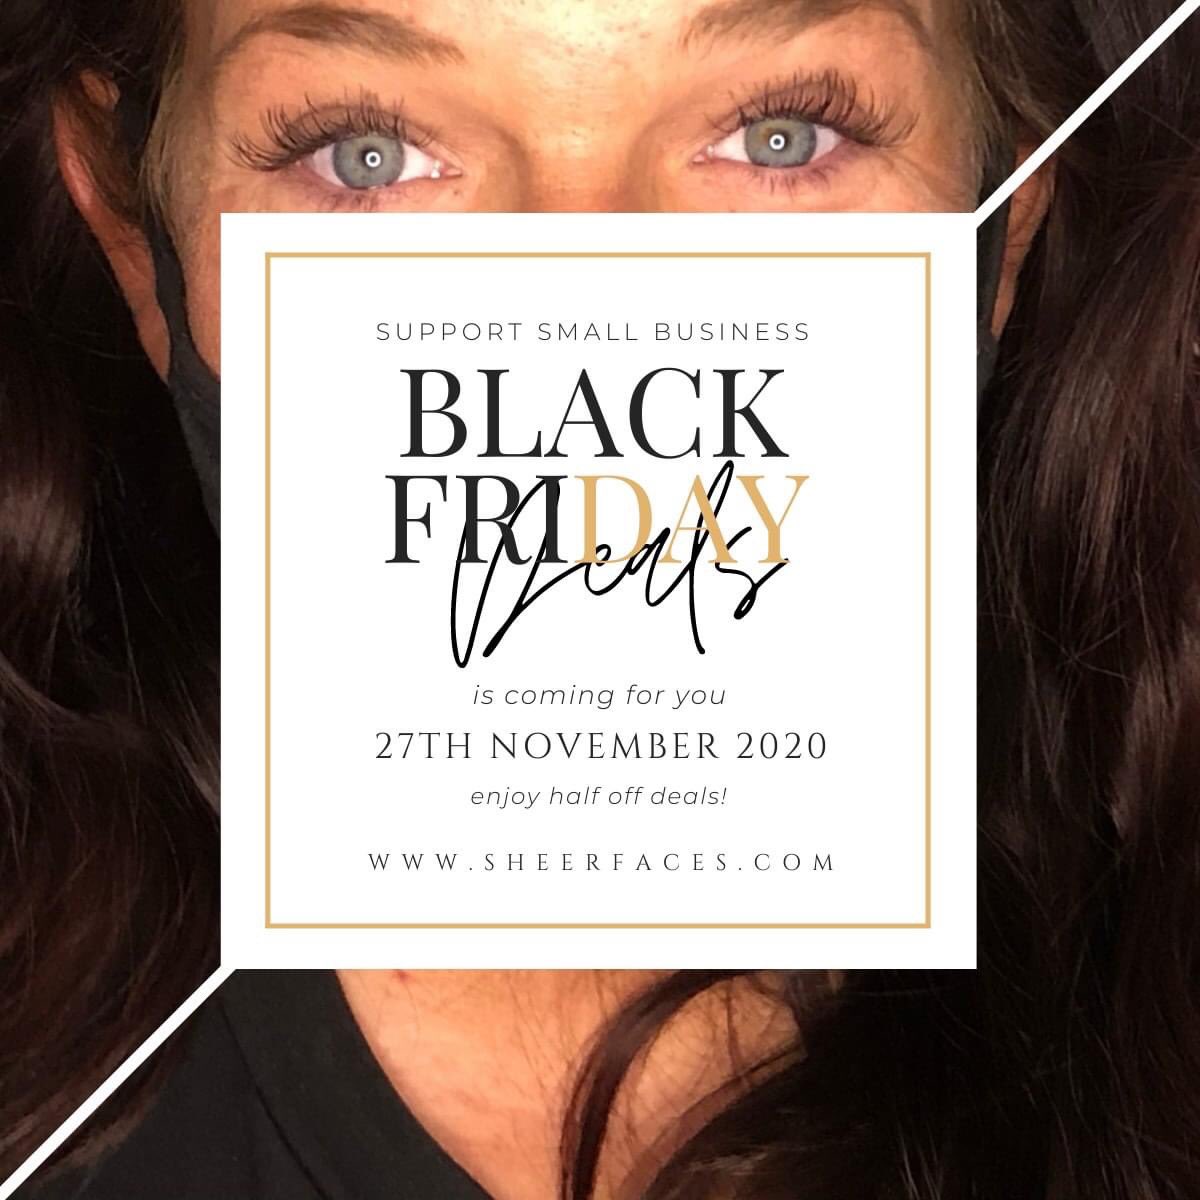 #shopsmall with our #blackfridaydeals. Get up to 55% of a #classiclashextensions session. Get the deal by purchasing one of our electronic #giftcards on #blackfriday. #blackownedbusiness